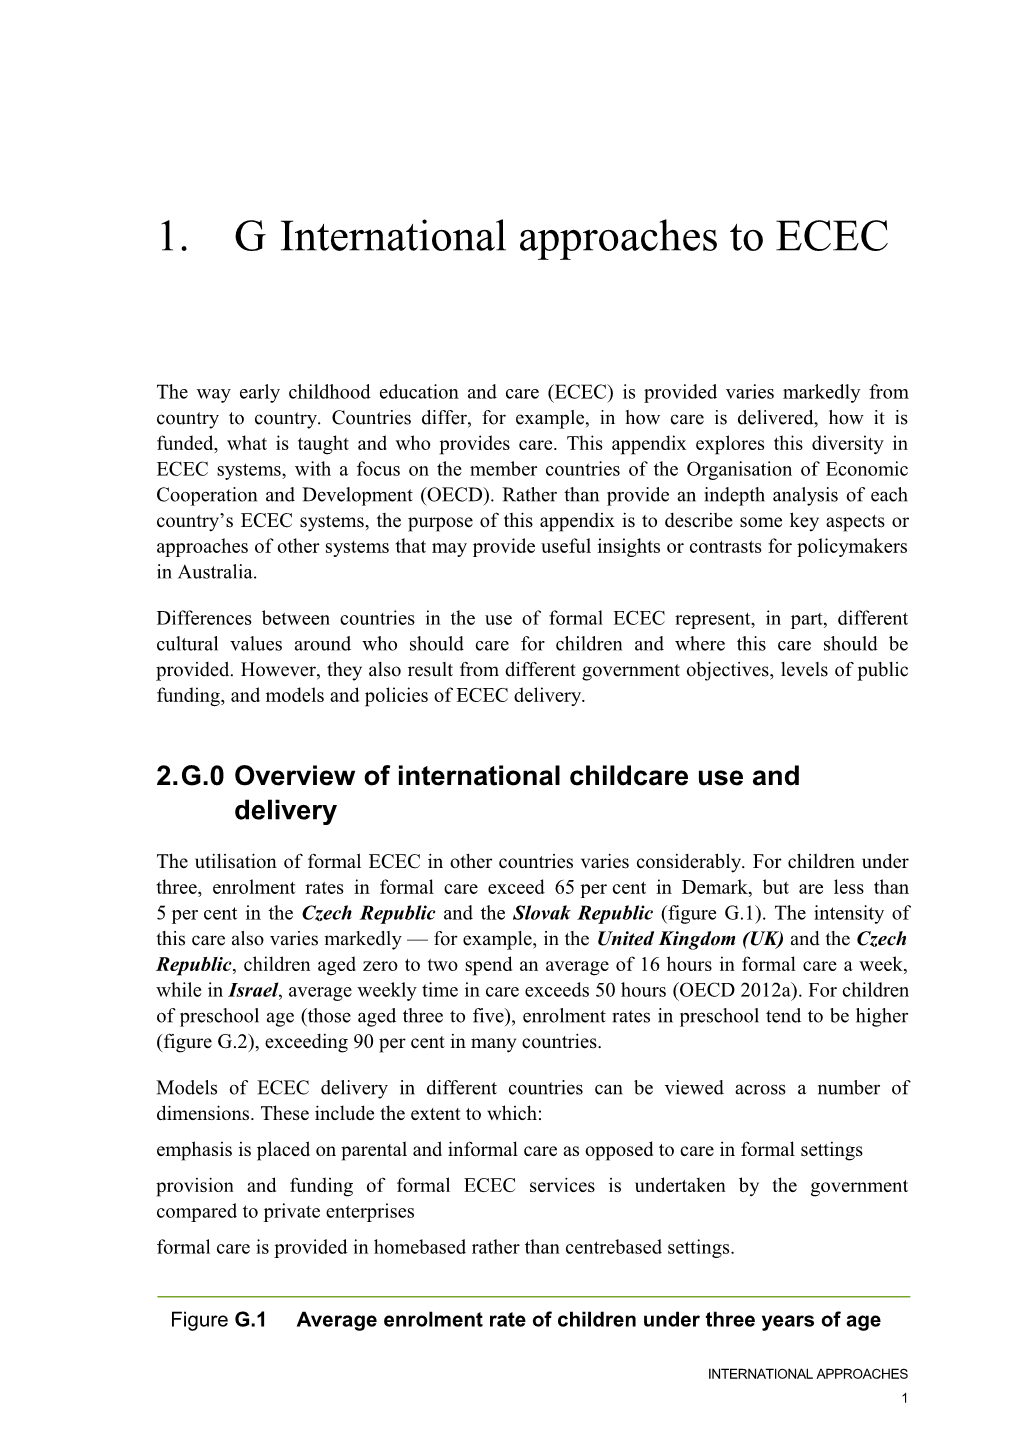 Ginternational Approaches to ECEC